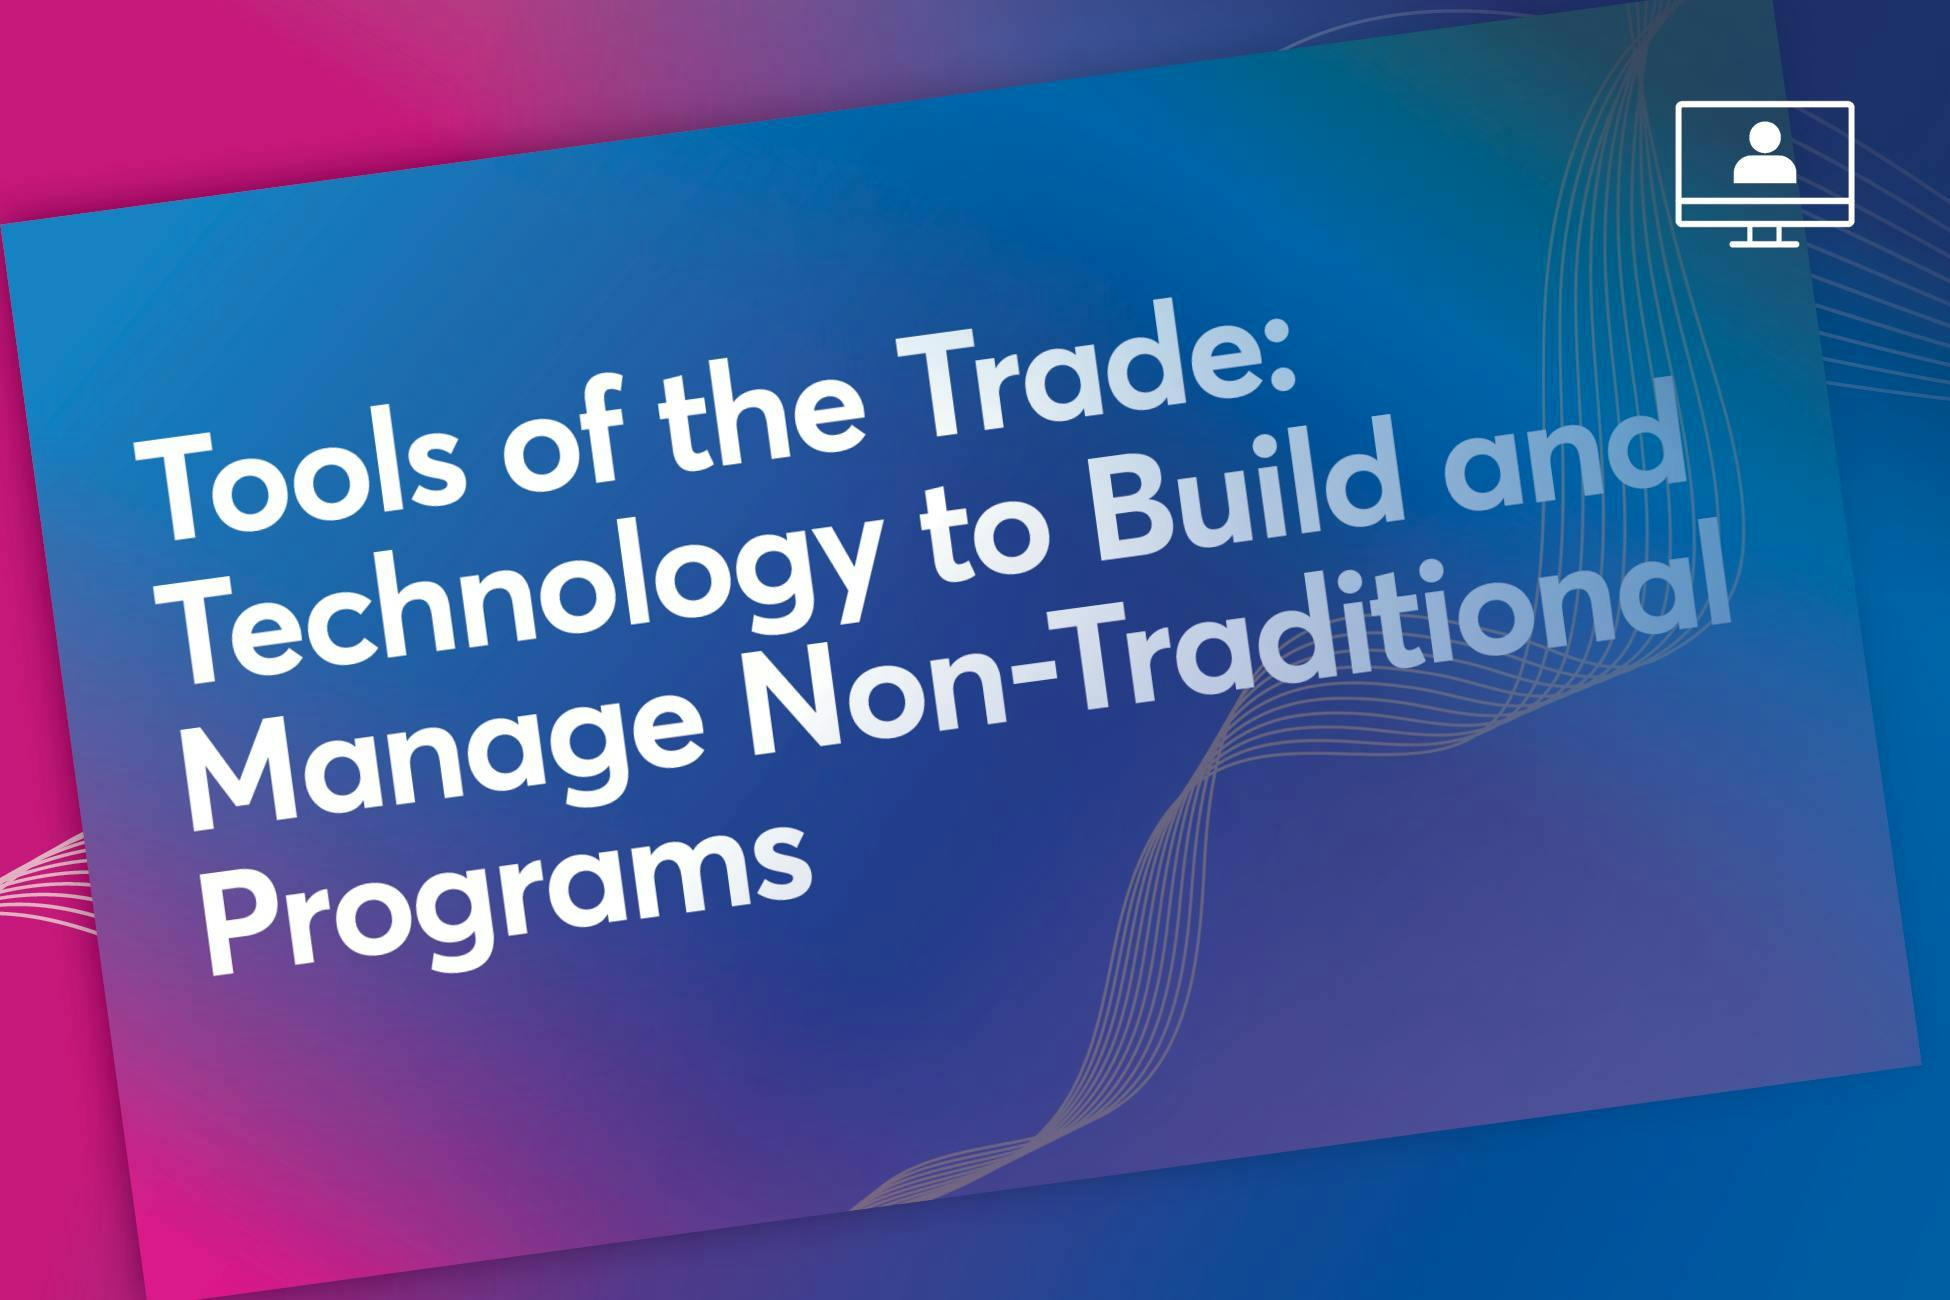 Tools of the Trade: Technology to Build and Manage Non-Traditional Programs